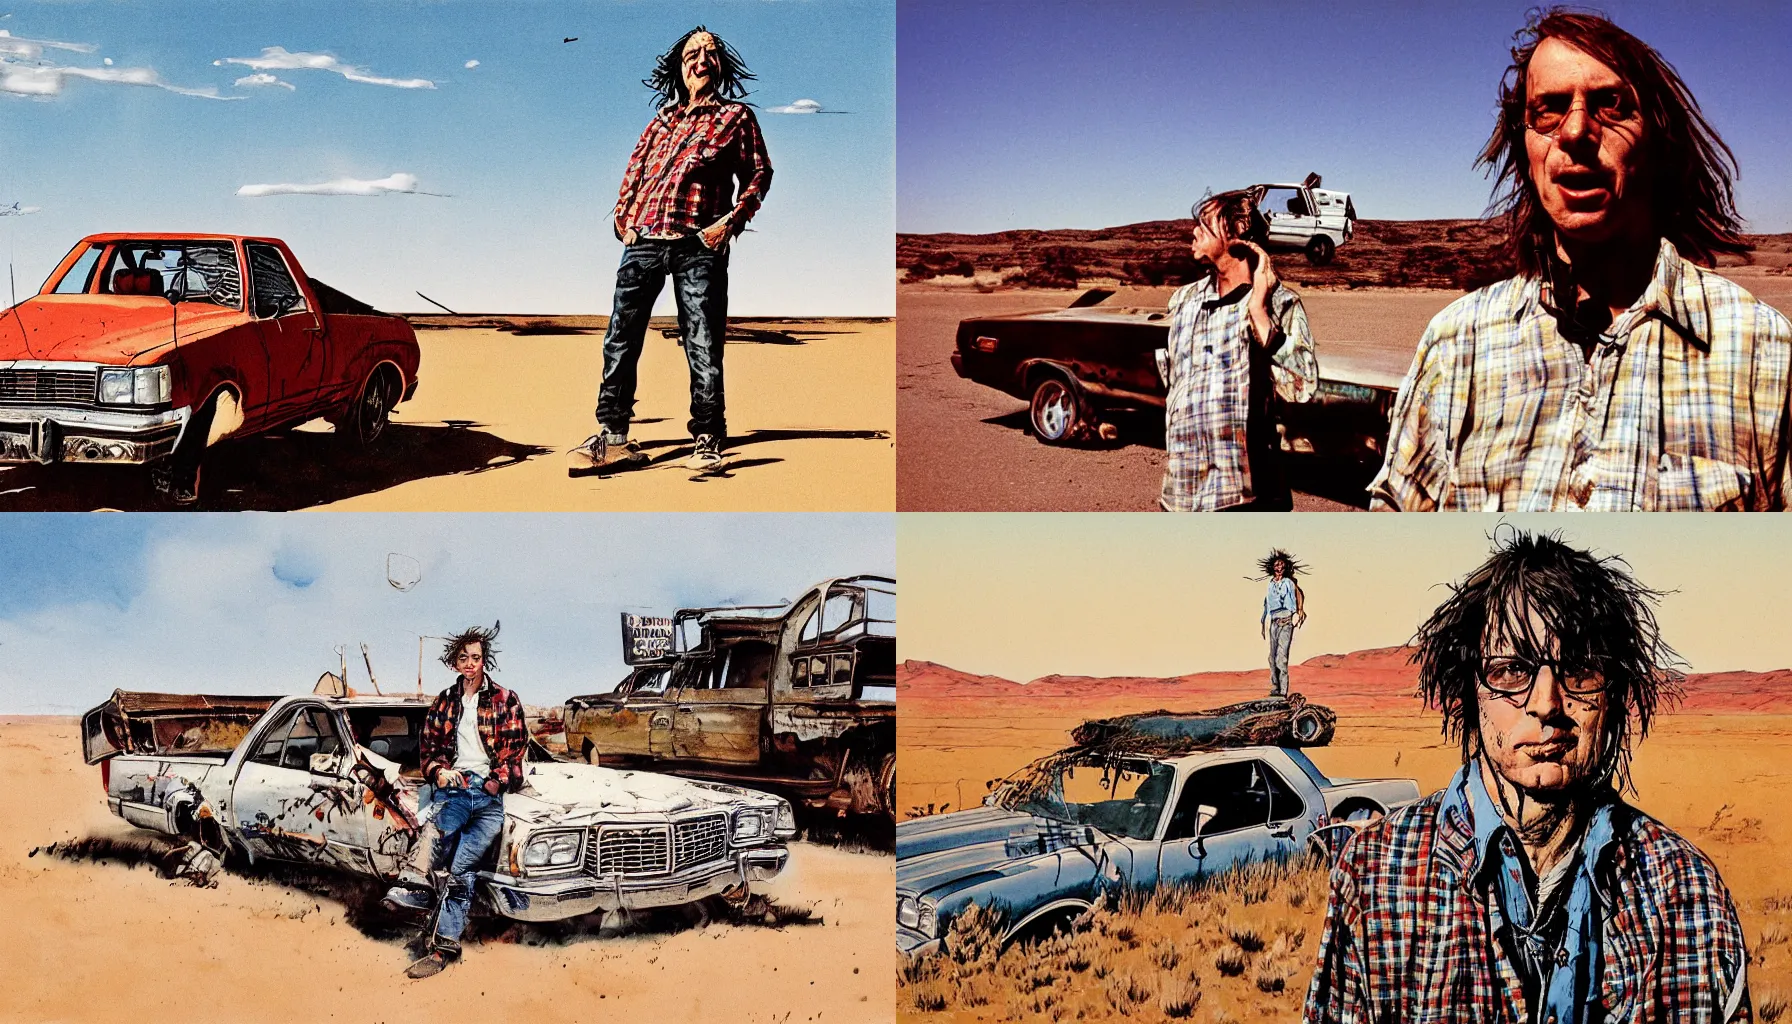 Prompt: ralph steadman illustration portrait of a young man wearing a flannel shirt with a mullet and a dangle earring, standing in front of an old el camino car, desert landscape, panting, film grain, surreal